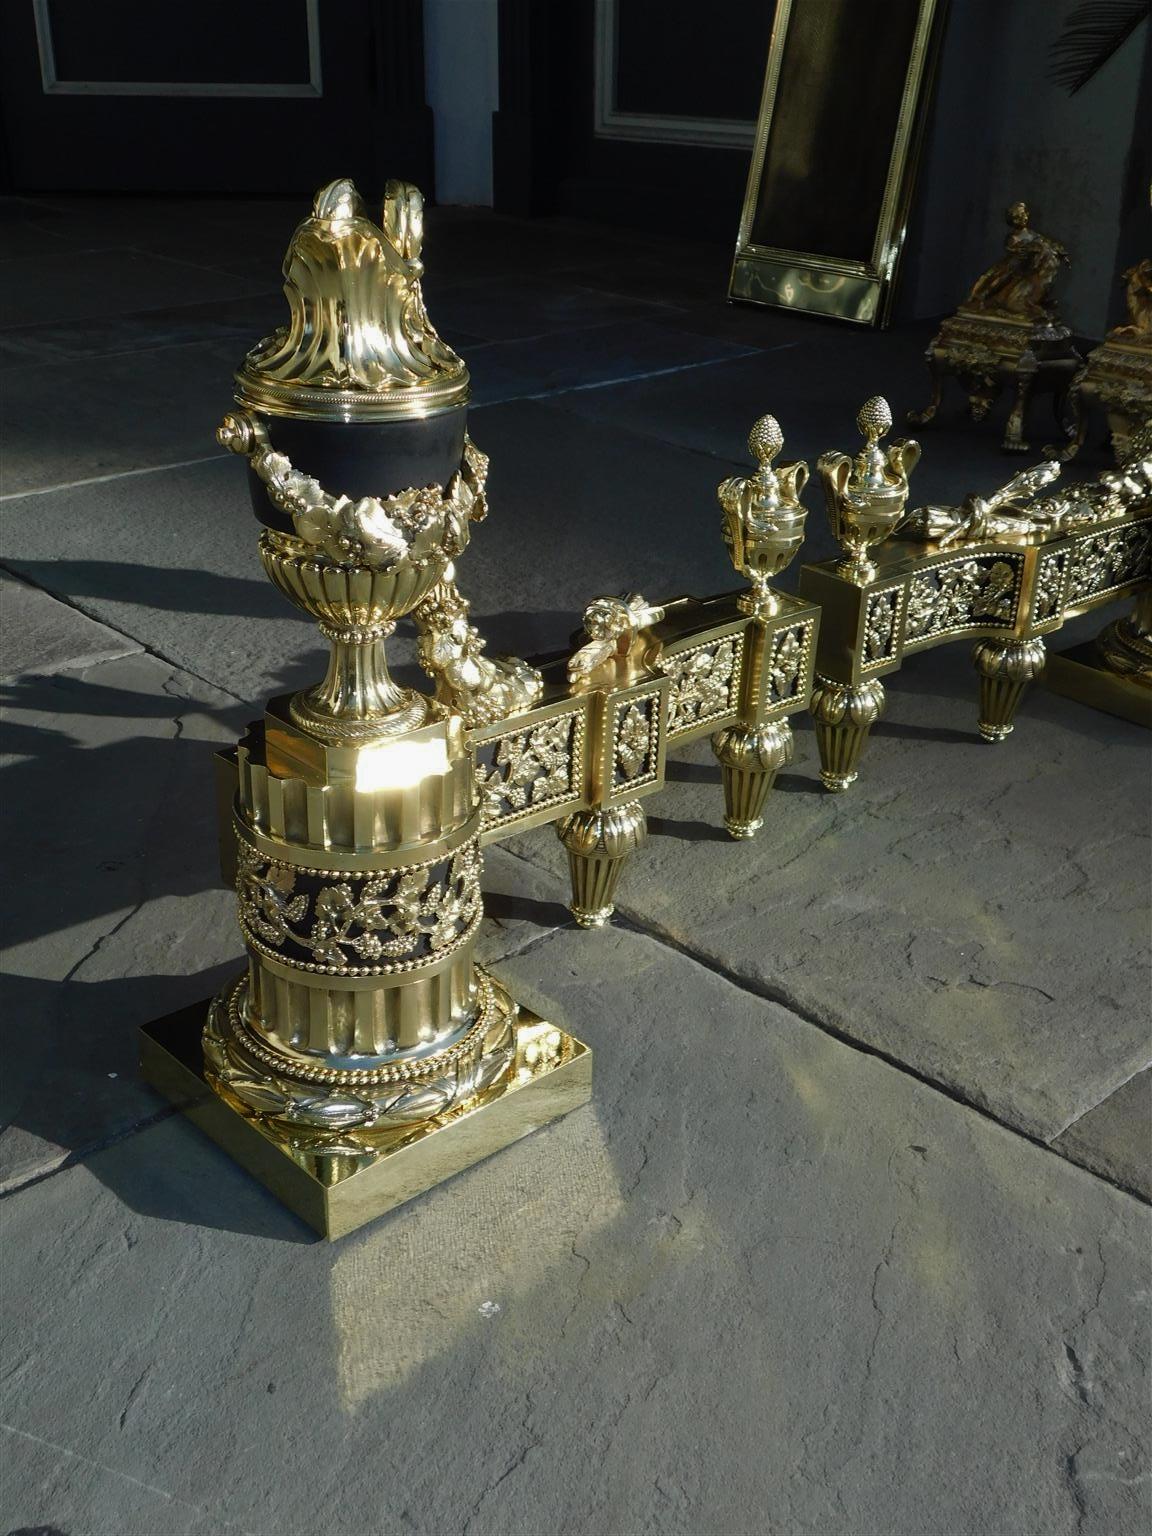 Cast Pair of French Monumental Brass & Painted Urn Foliage Fire Place Chenets, C 1790 For Sale